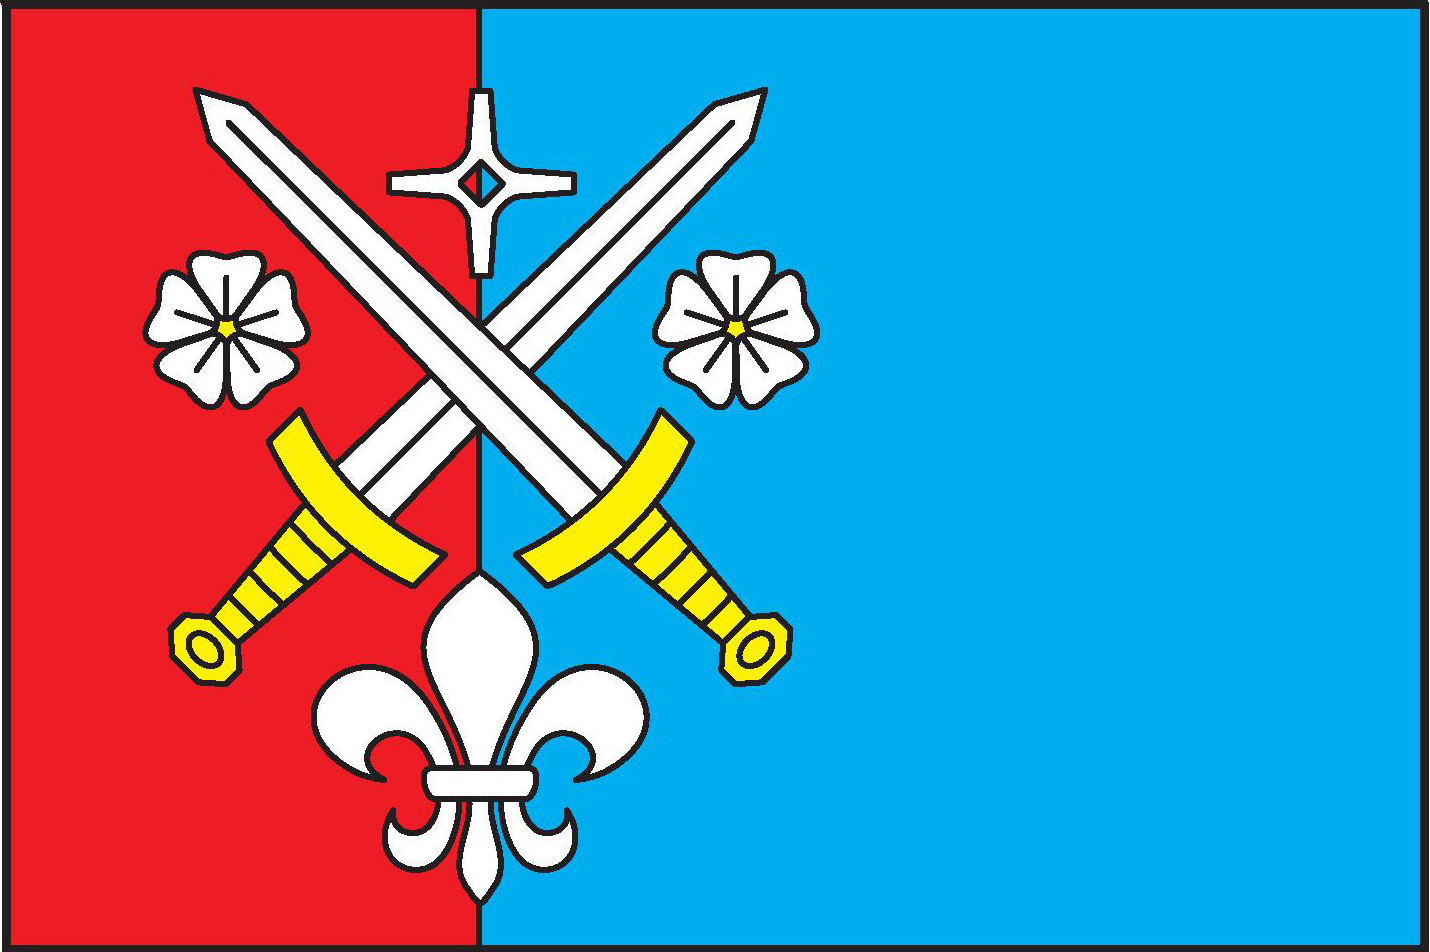 Flag of St. Louis - Wikipedia